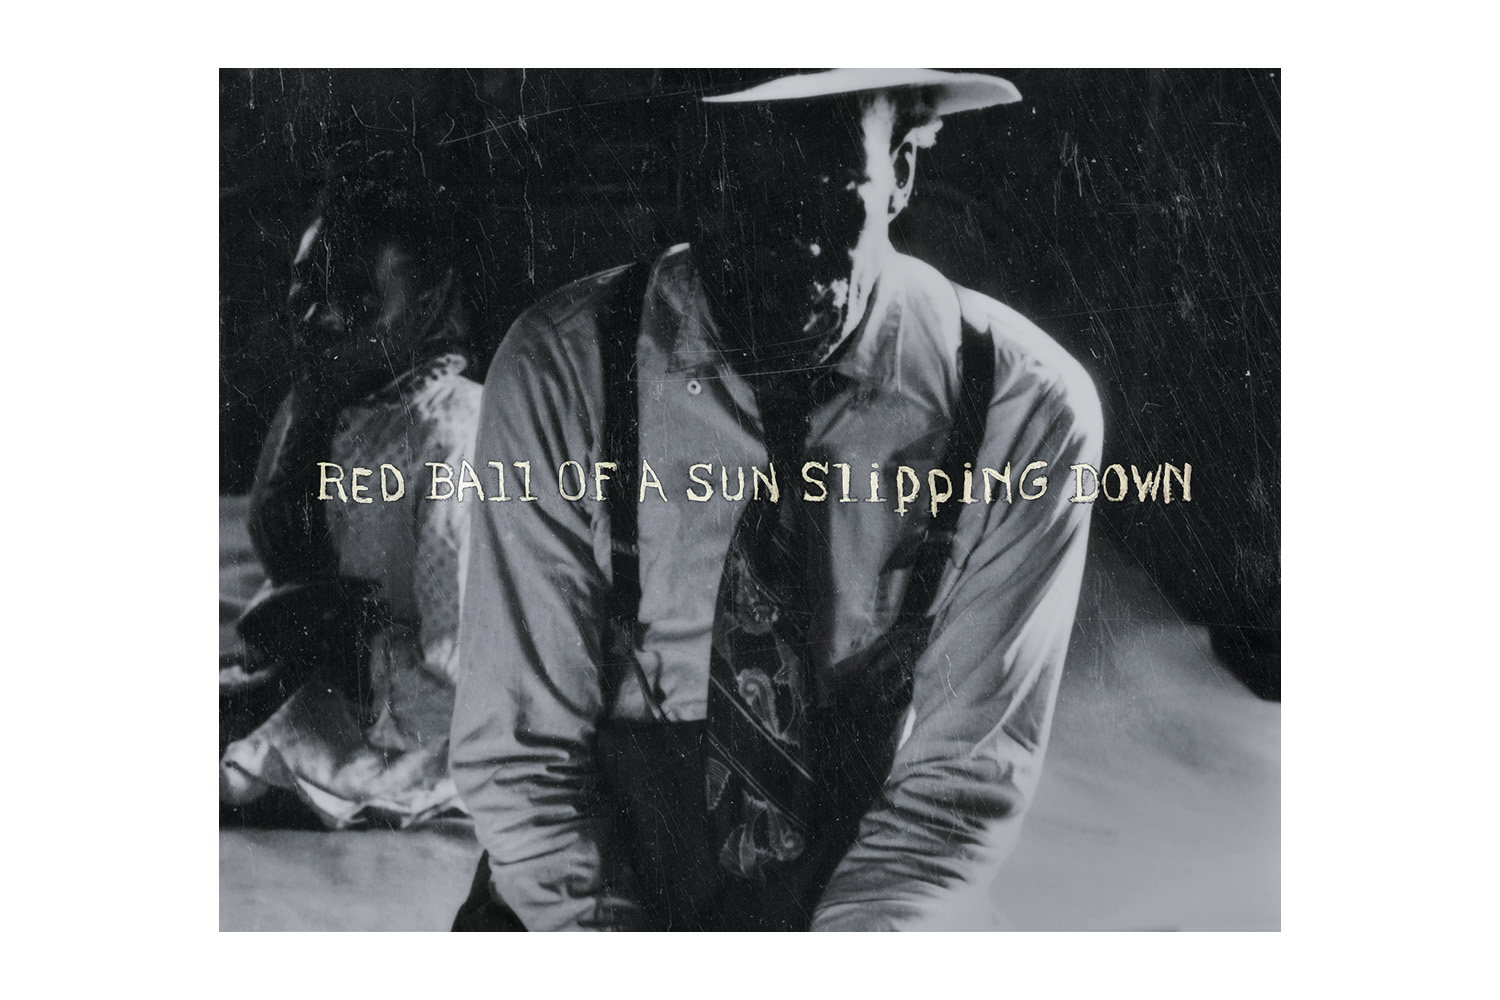 Eugene Richards' Red Ball of a Sun Slipping Down, published by Many Voices Press
                              Eugene Richards' book full of unpublished black and white photos and recent color work is a visual reminiscence of the Arkansas Delta, a region he first entered in 1969, and would continually return to.